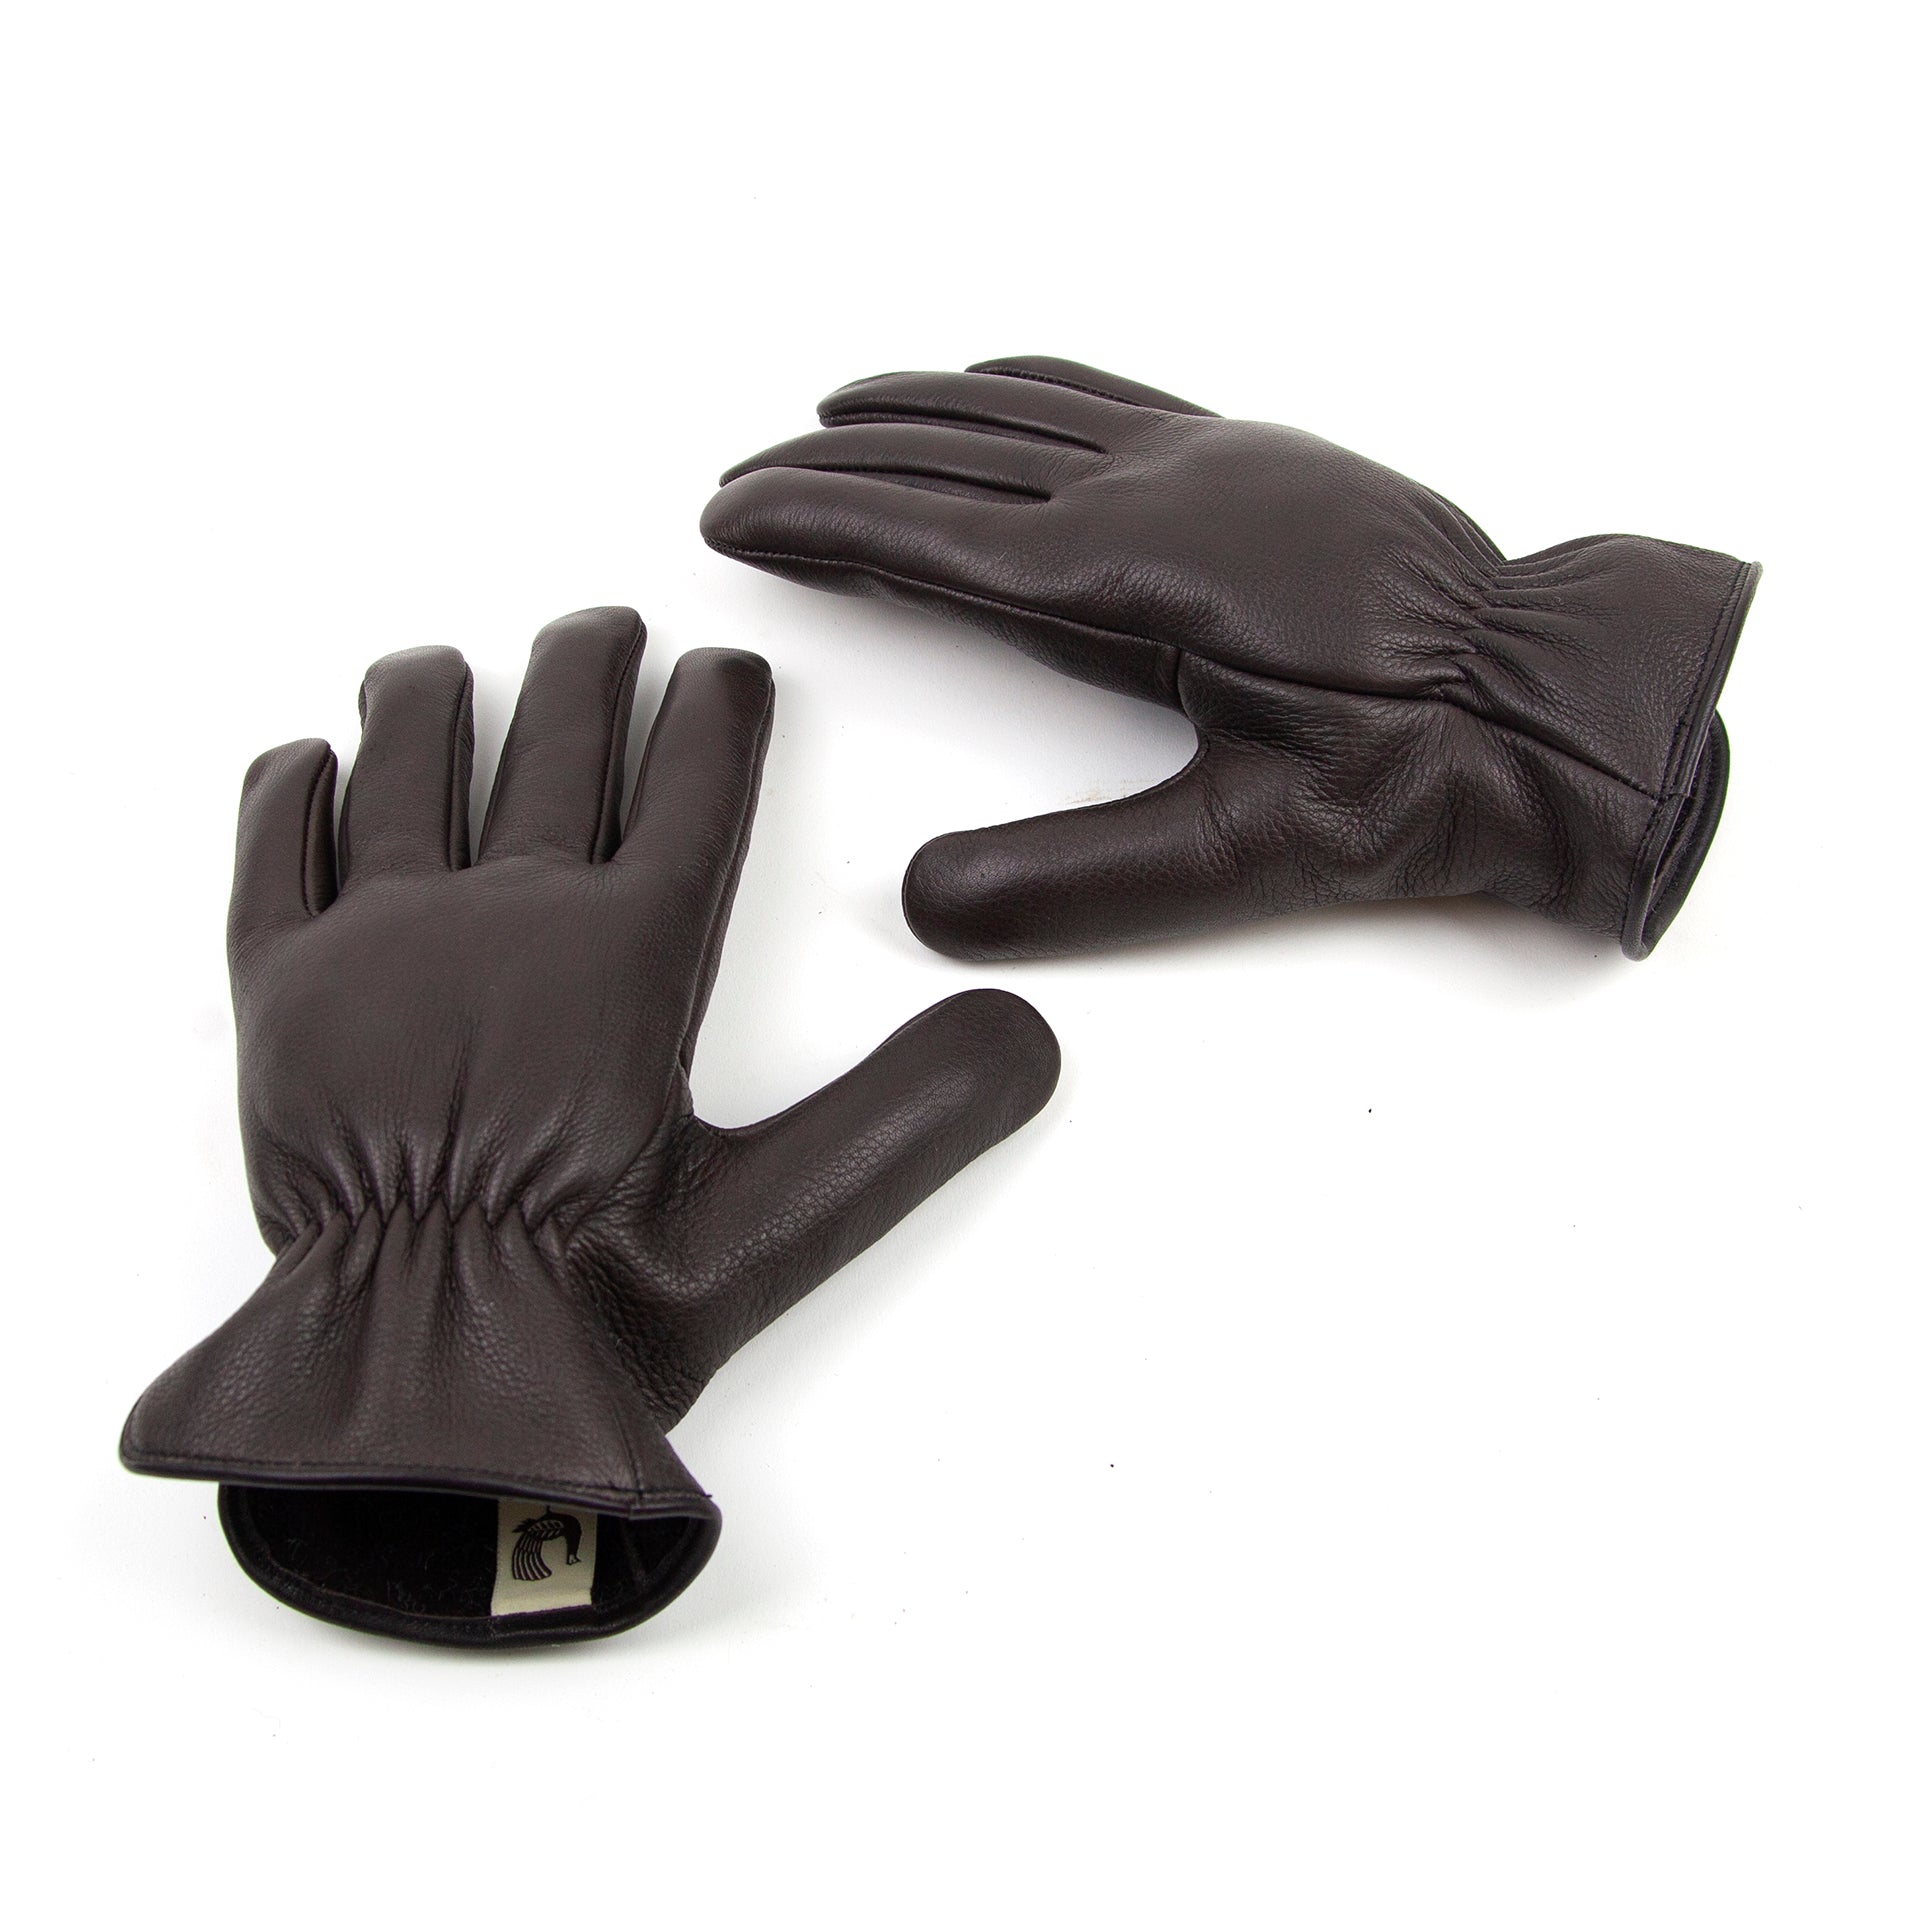 The Roper Glove - Brown Leather